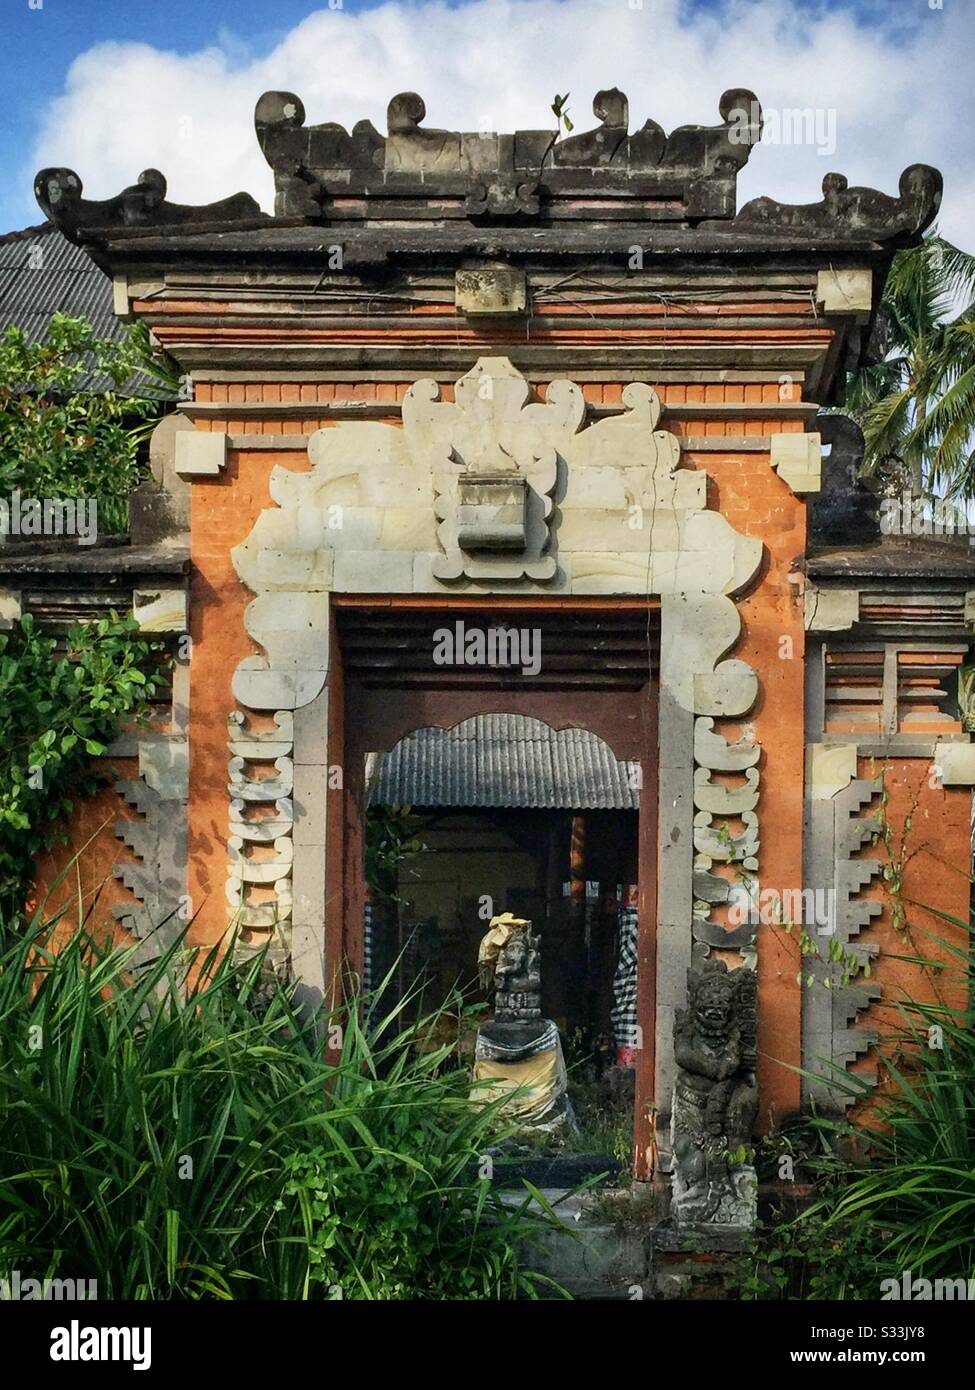 Ornate Entrance Gate To A Residential House Compound In Candidasa Bali Indonesia Stock Photo Alamy